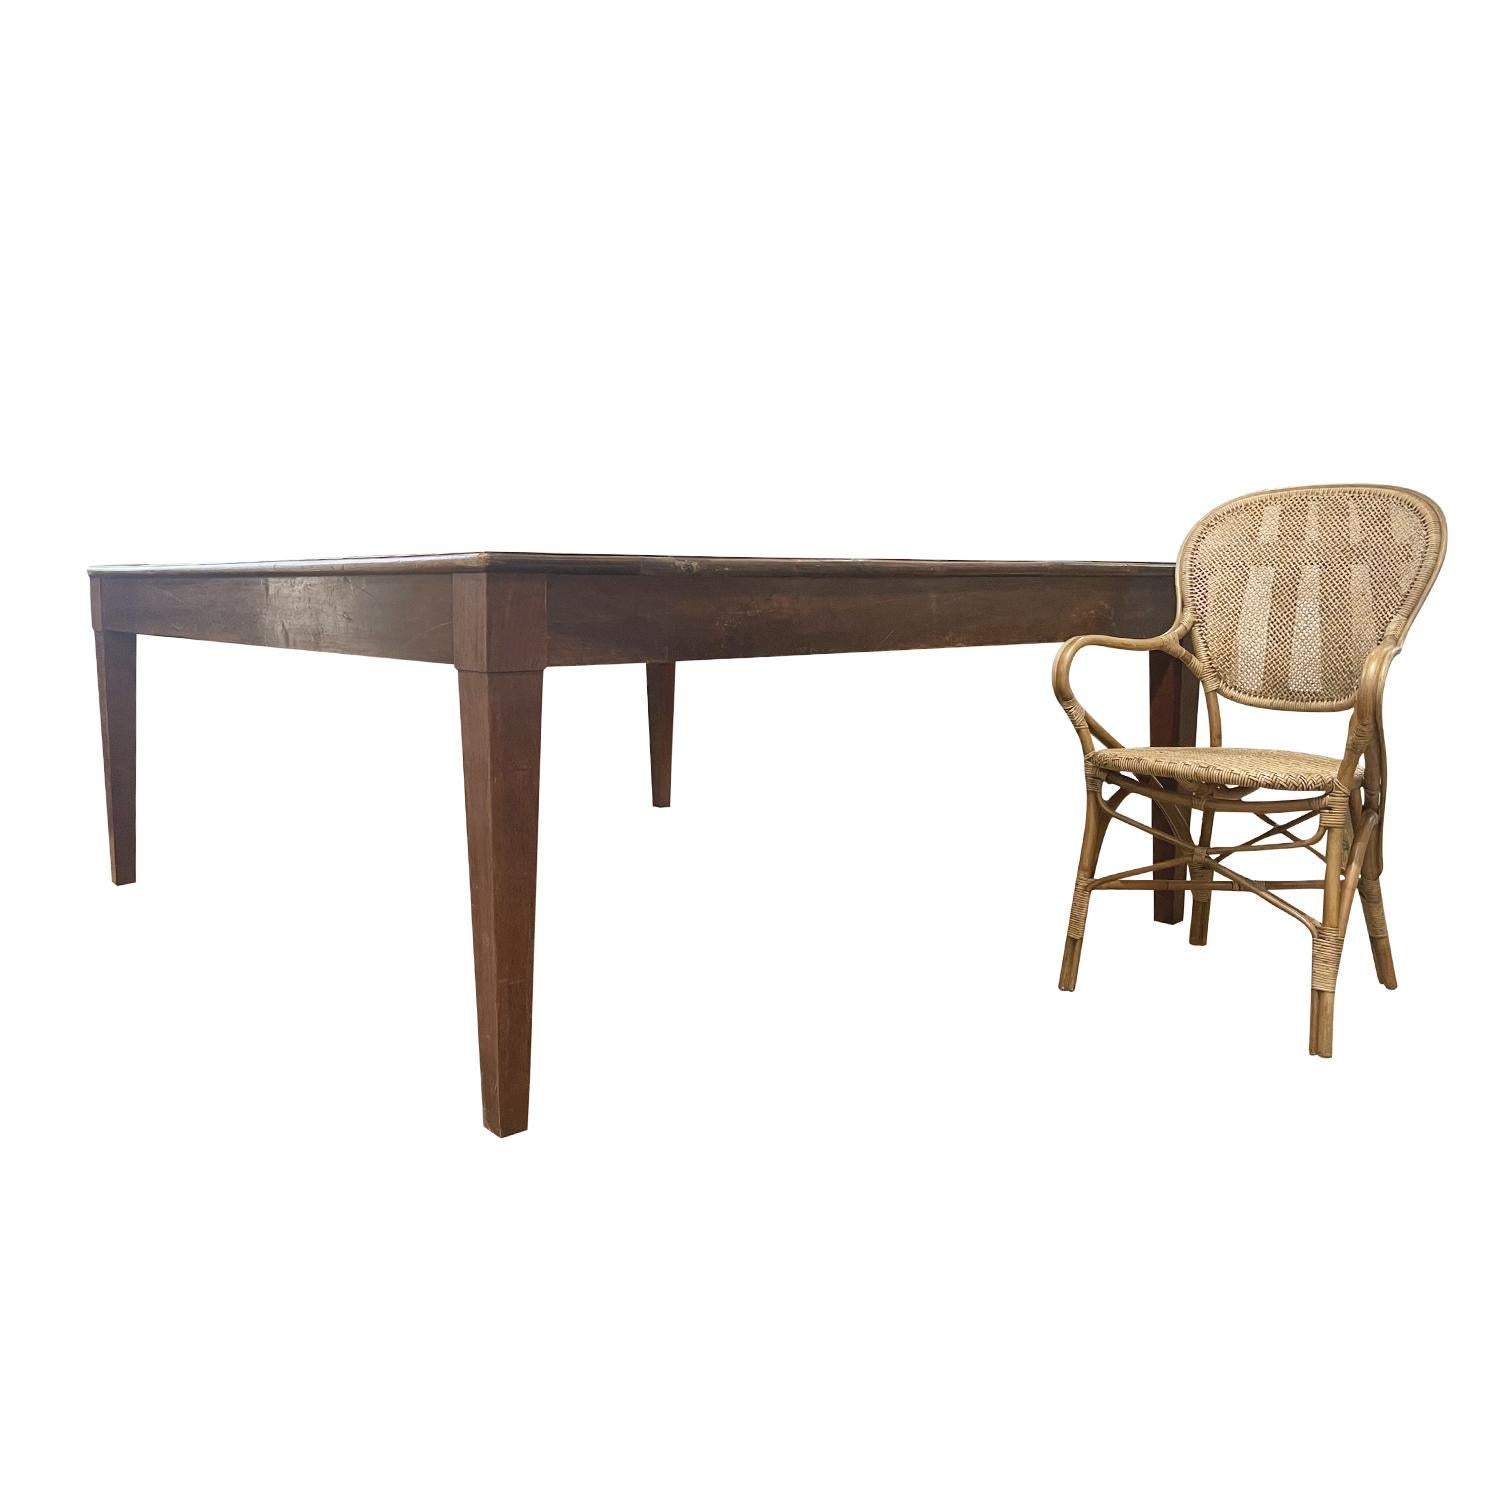 An antique massive rectangular dining room table made of hand crafted Walnut, in good condition. This French Provincial farmhouse table has a strong and sturdy construction. Neo-Classical Style, wide planked hand waxed table top supported by